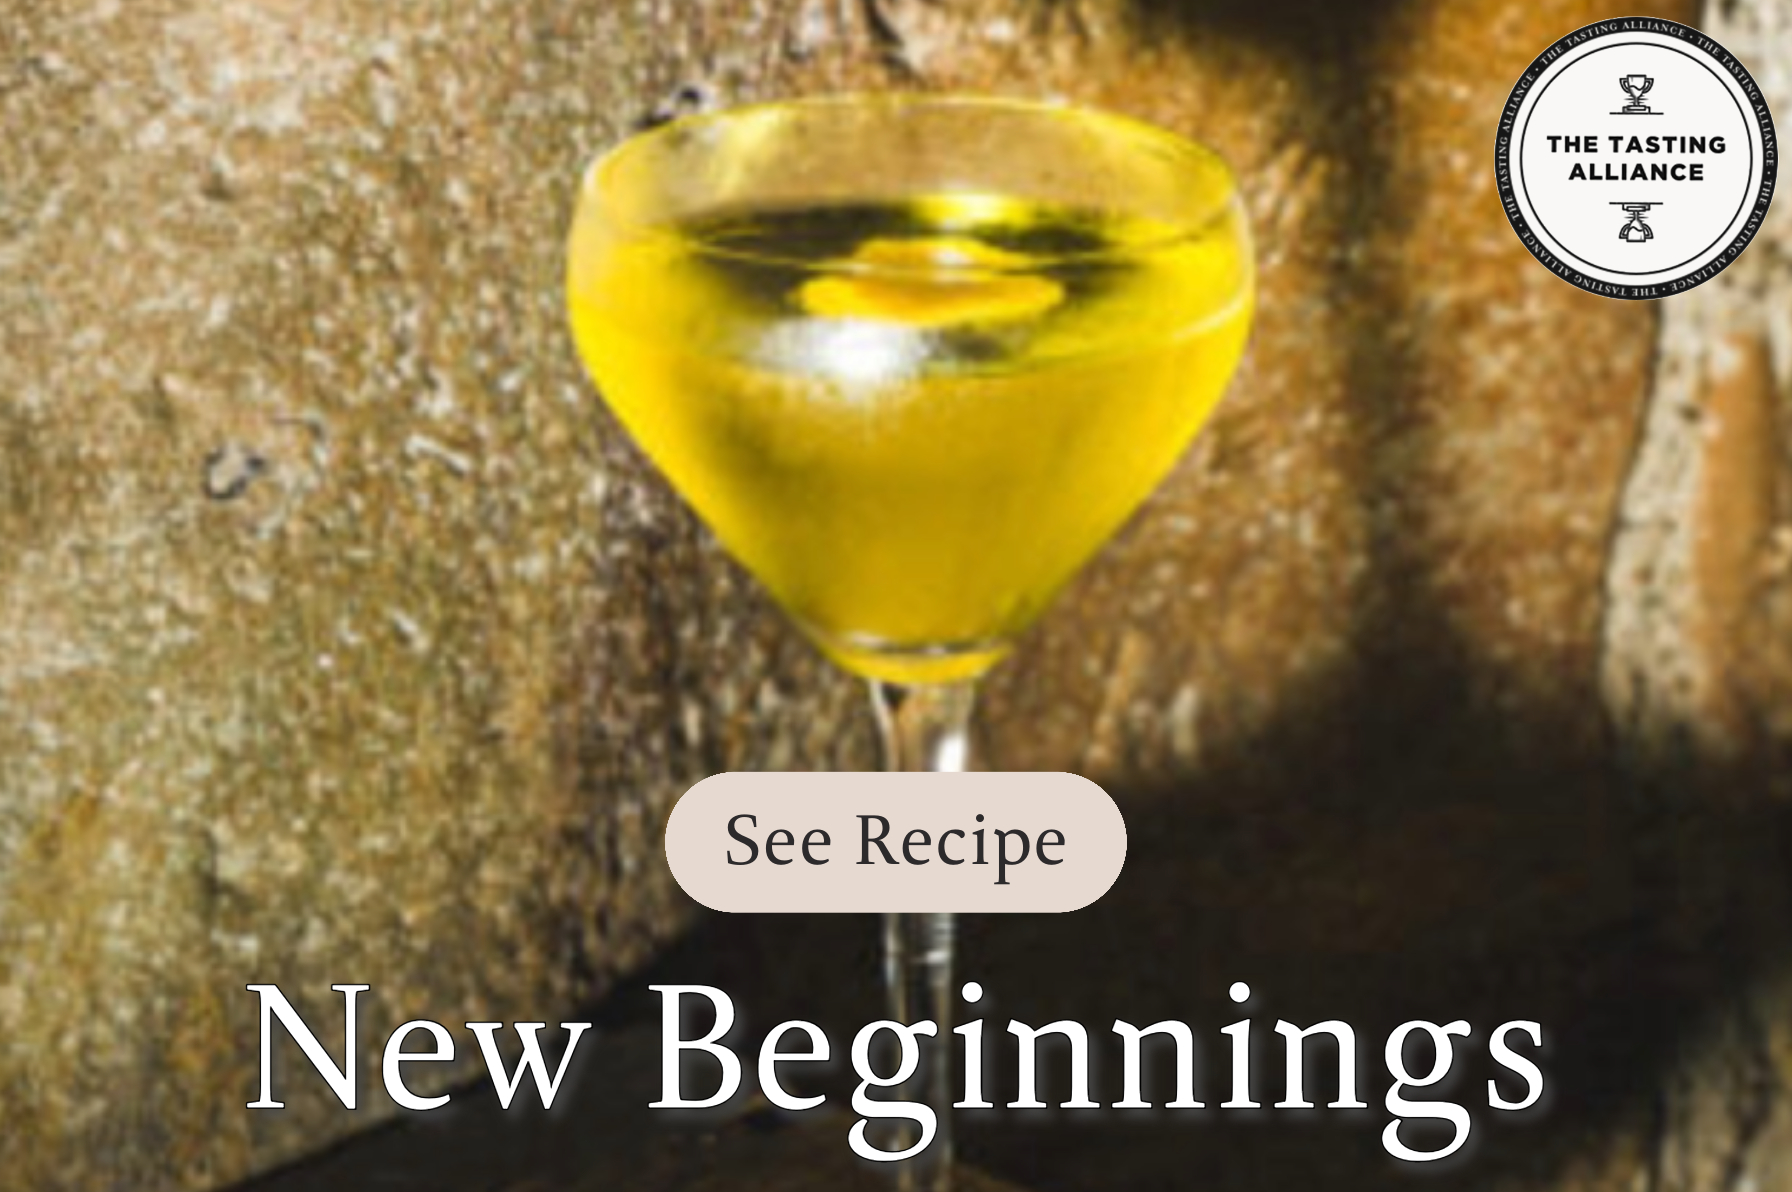 The recipe for The Tasting Alliance's New Beginnings Cocktail